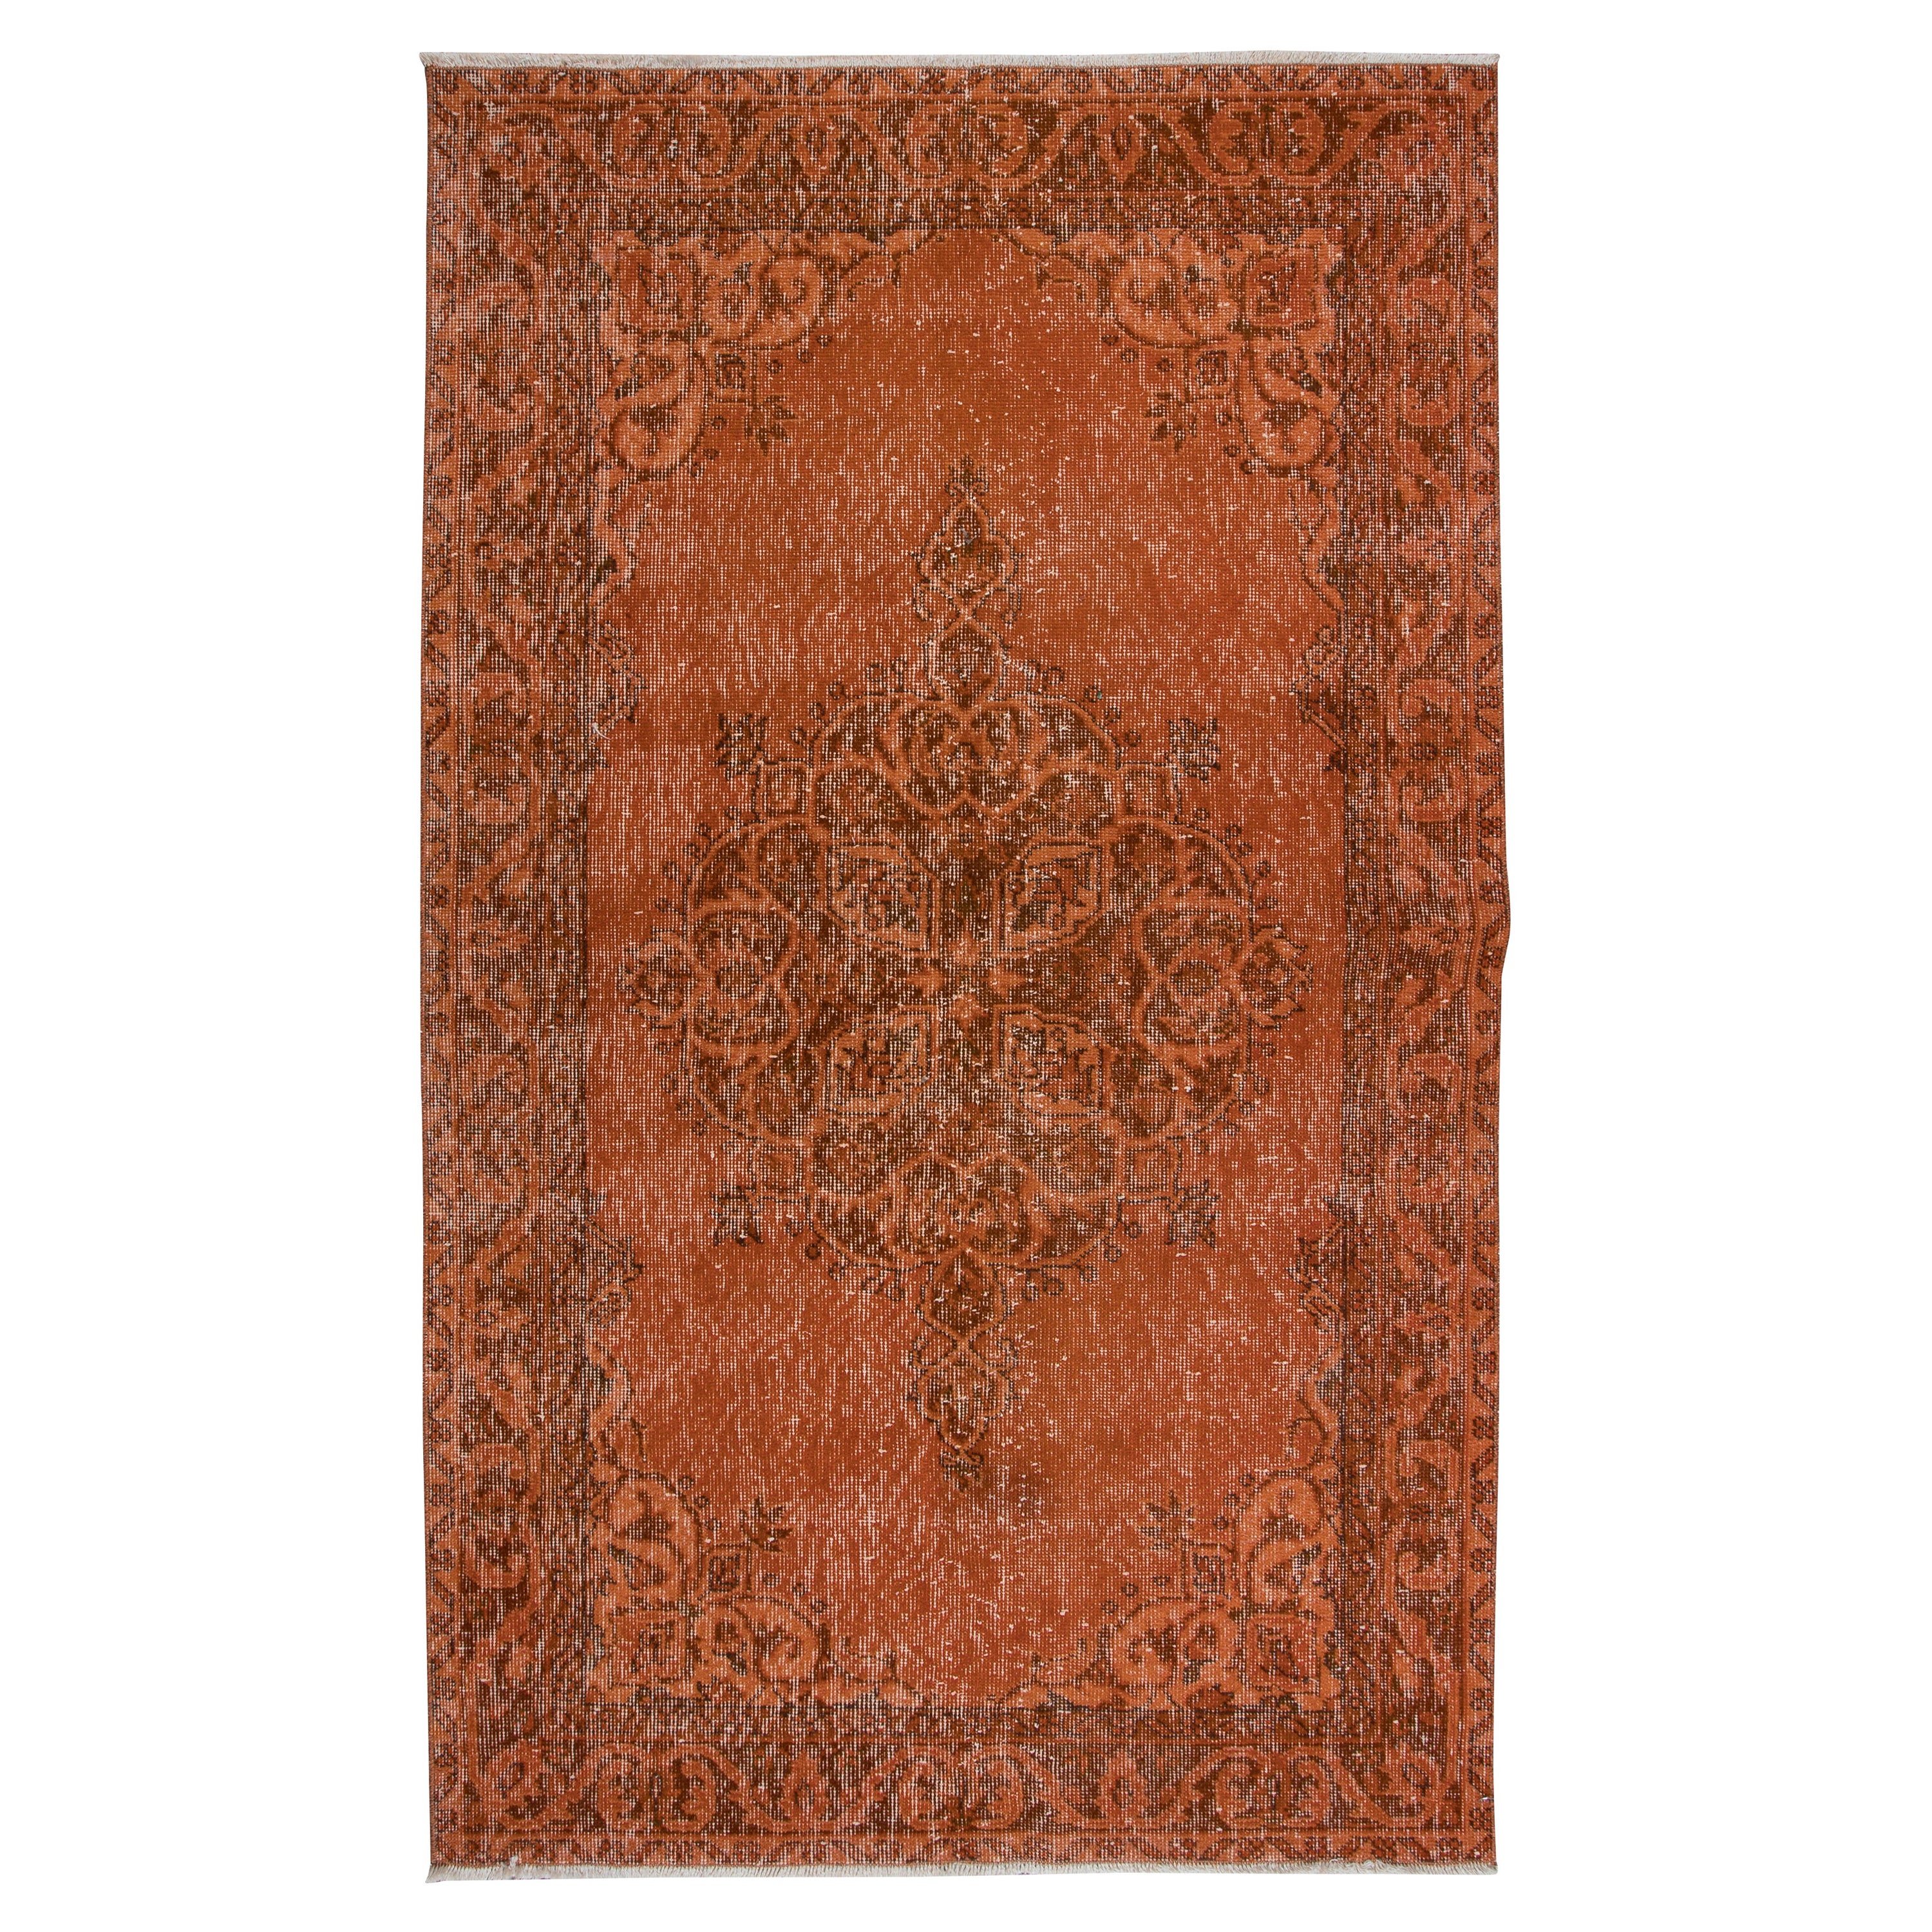 4x6.6 Ft Orange Handmade Accent Rug with Medallion Desig, Small Wool Carpet For Sale